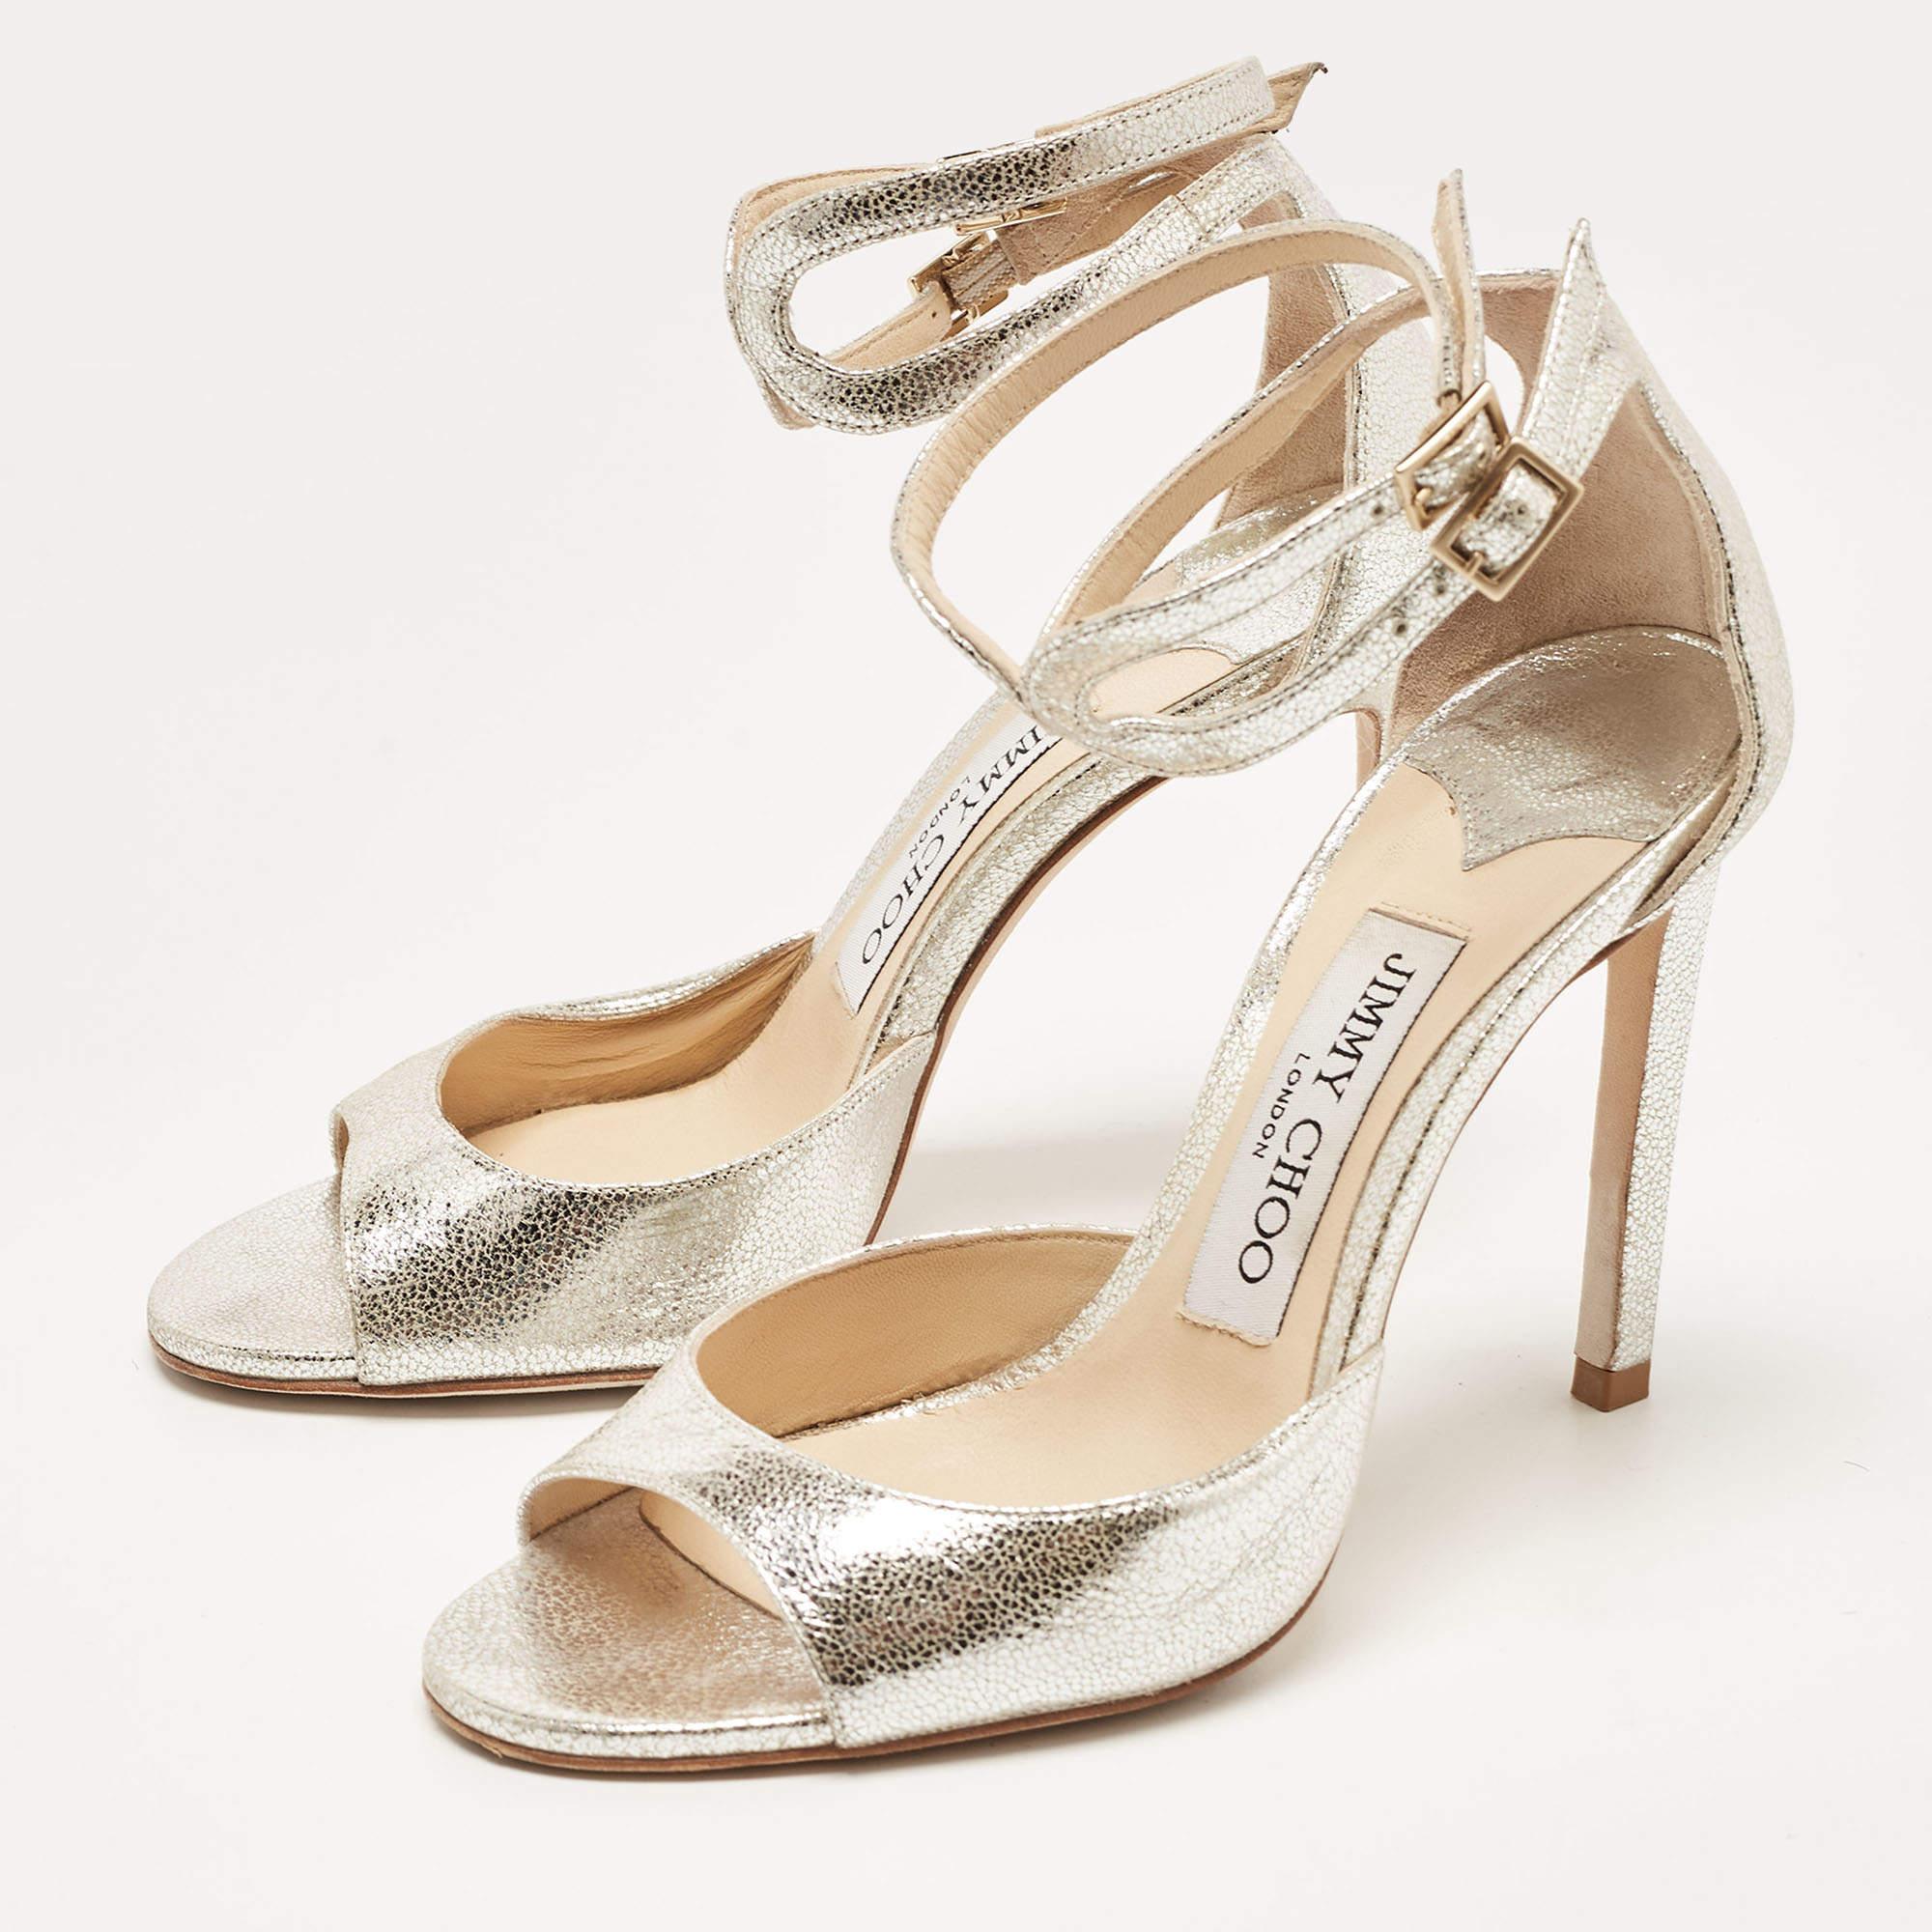 Jimmy Choo Silver Crackled Patent Leather Lane Sandals Size 35 For Sale 1